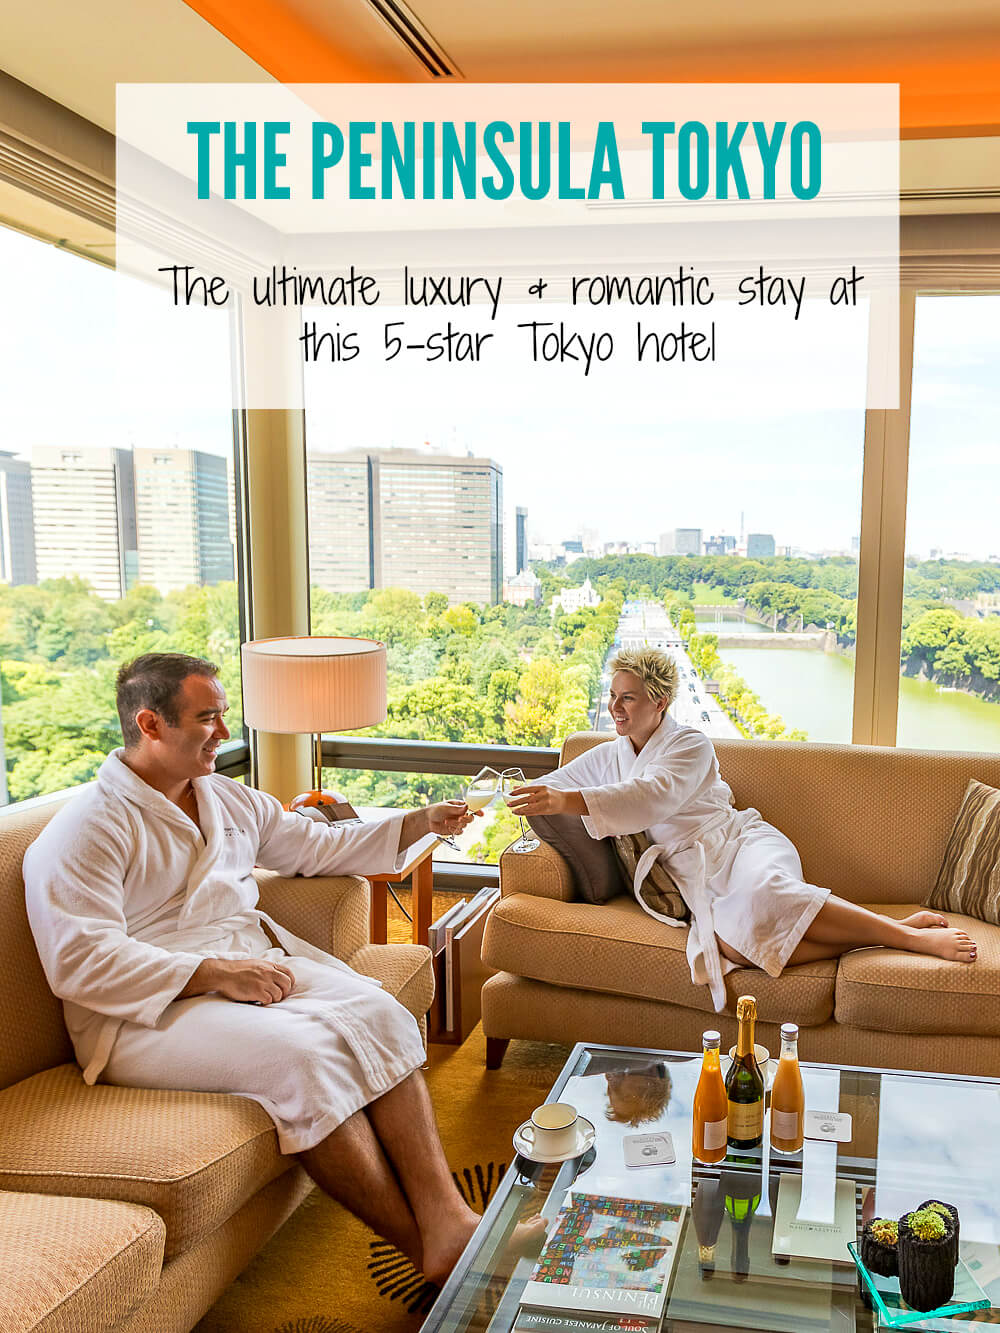 Deciding where to stay in Tokyo can be overwhelming. For the ultimate luxury experience, The Peninsula Tokyo delivers on all fronts, check out why! #travelJapan #Tokyotravel #luxurytravel #luxuryhotels #thepeninsulatokyo #exploreTokyo 